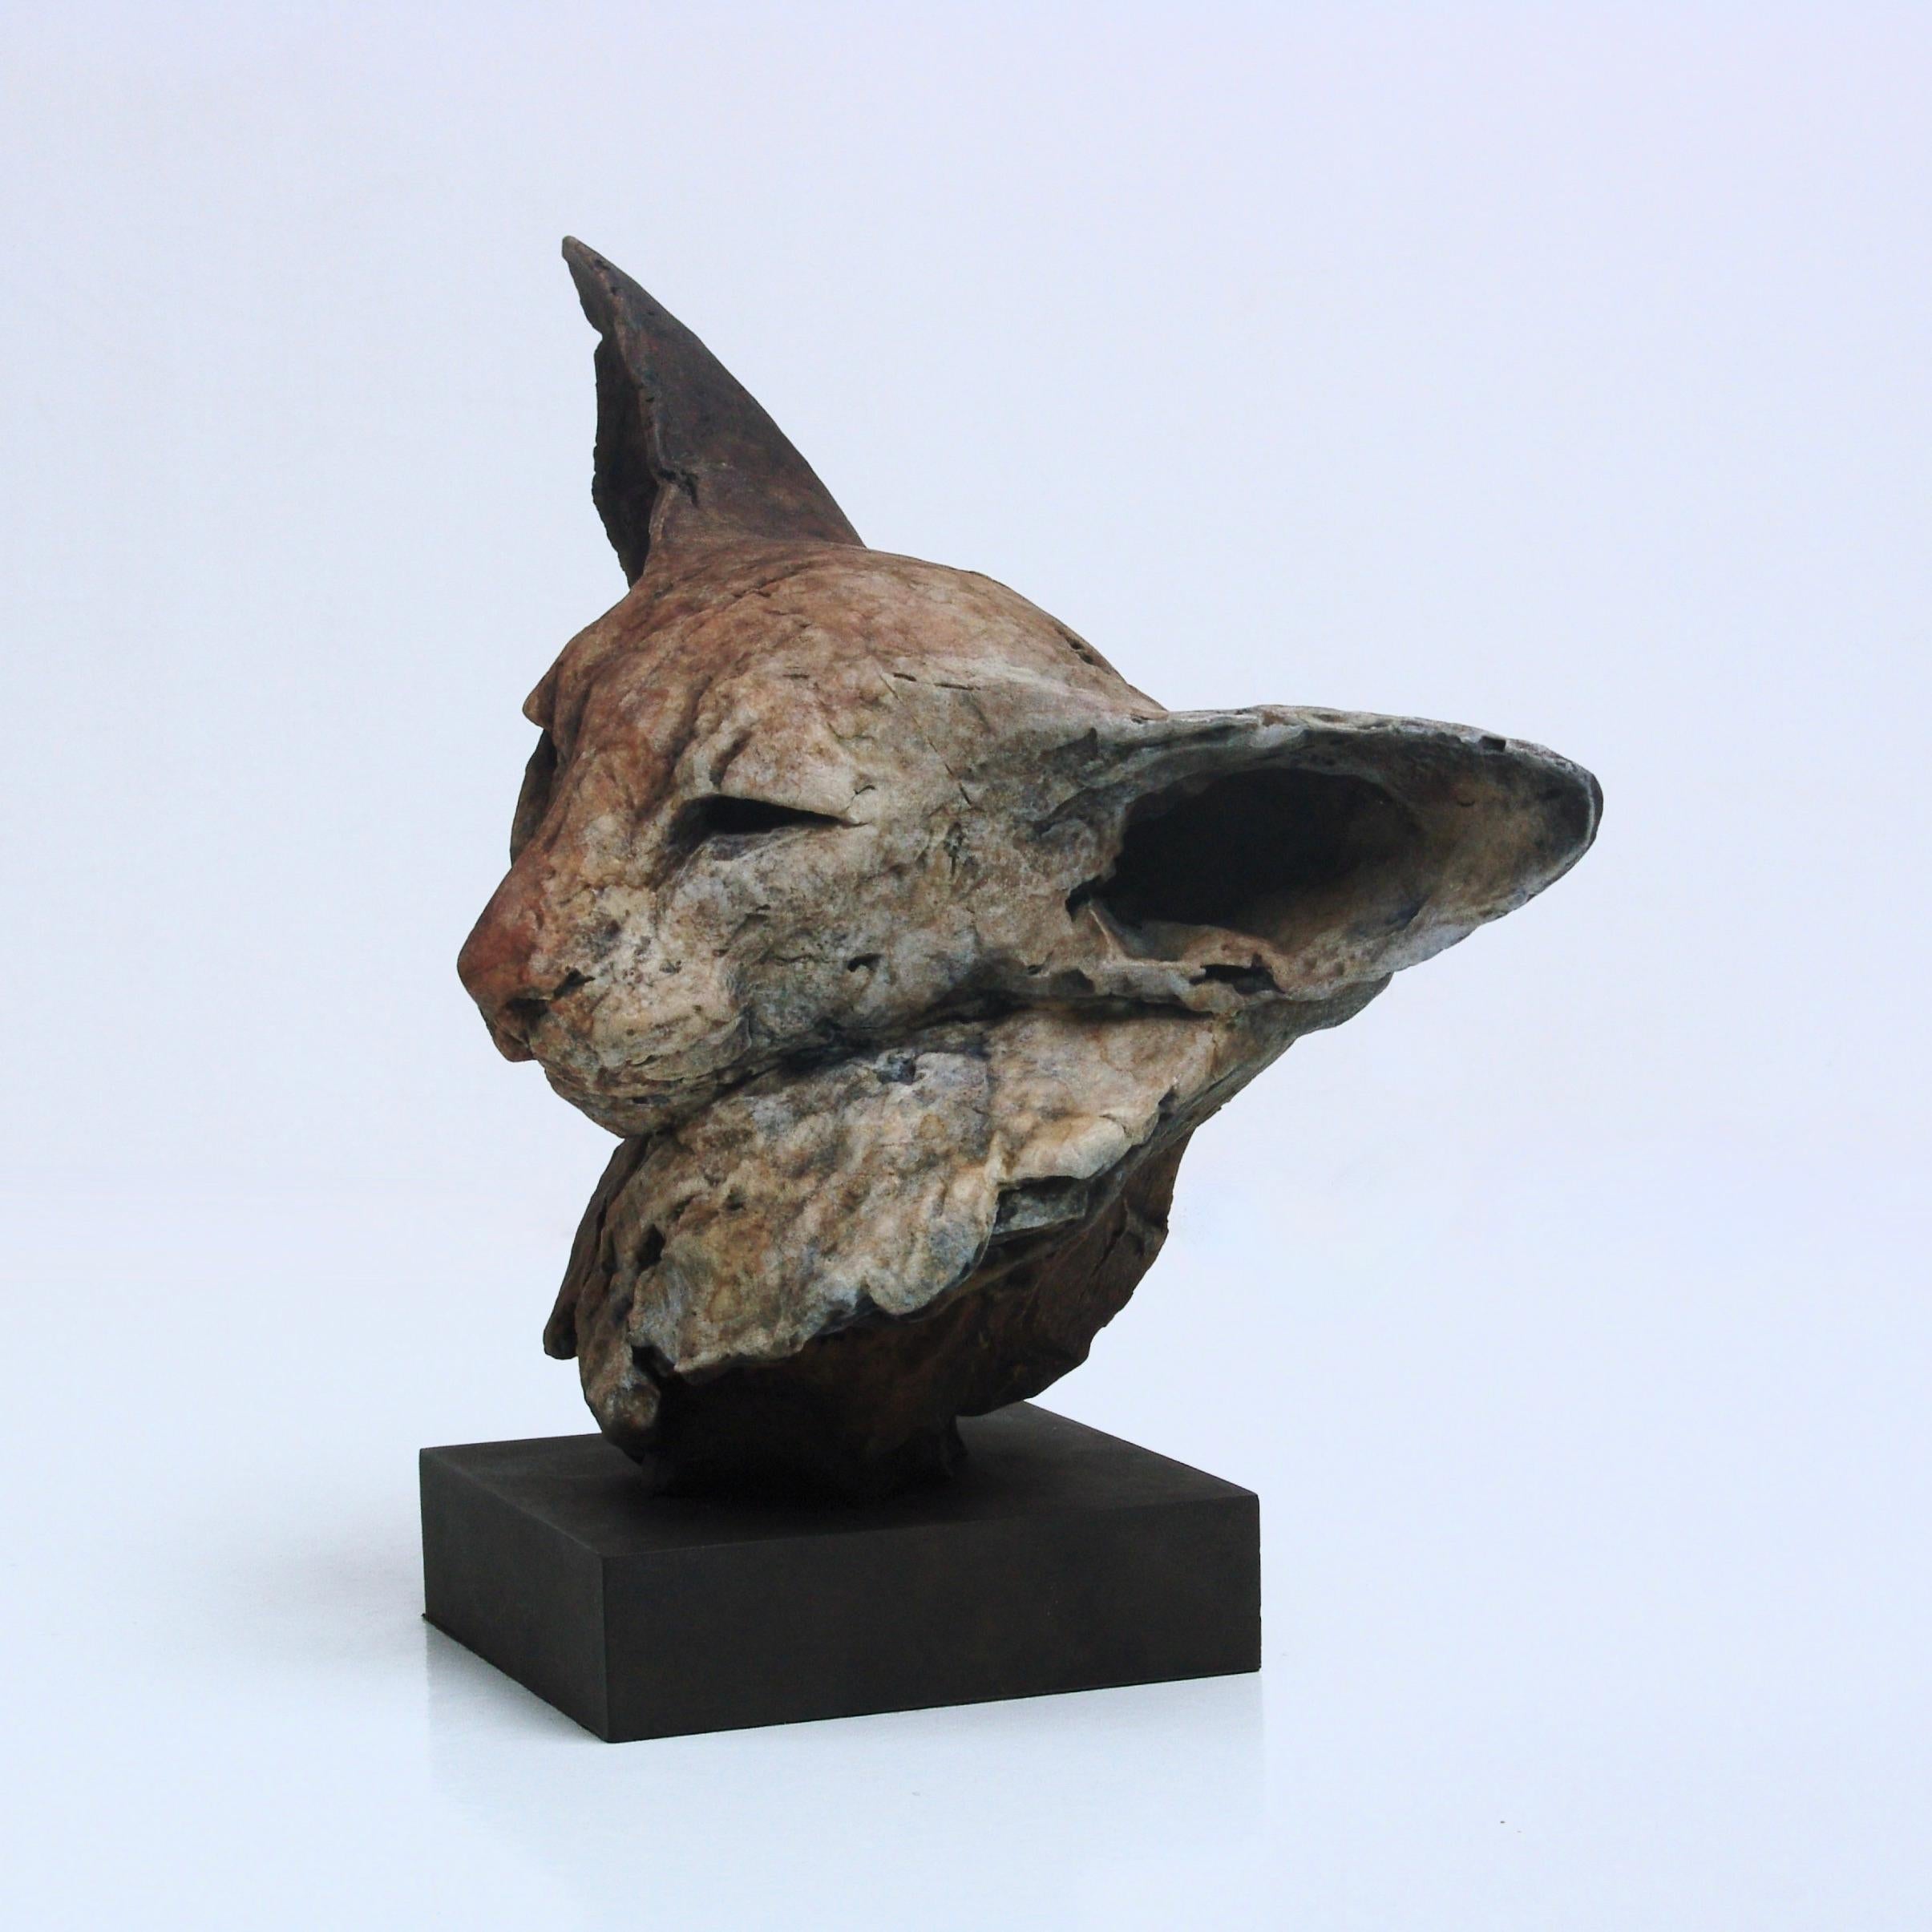 Nichola Theakston (1967) has established herself as one of the UK’s foremost contemporary sculptors working within the animal genre. 

With the ''Bastet Study 2'' Nichola shows how exquisite she can capture the feelings and expressions in an animal.